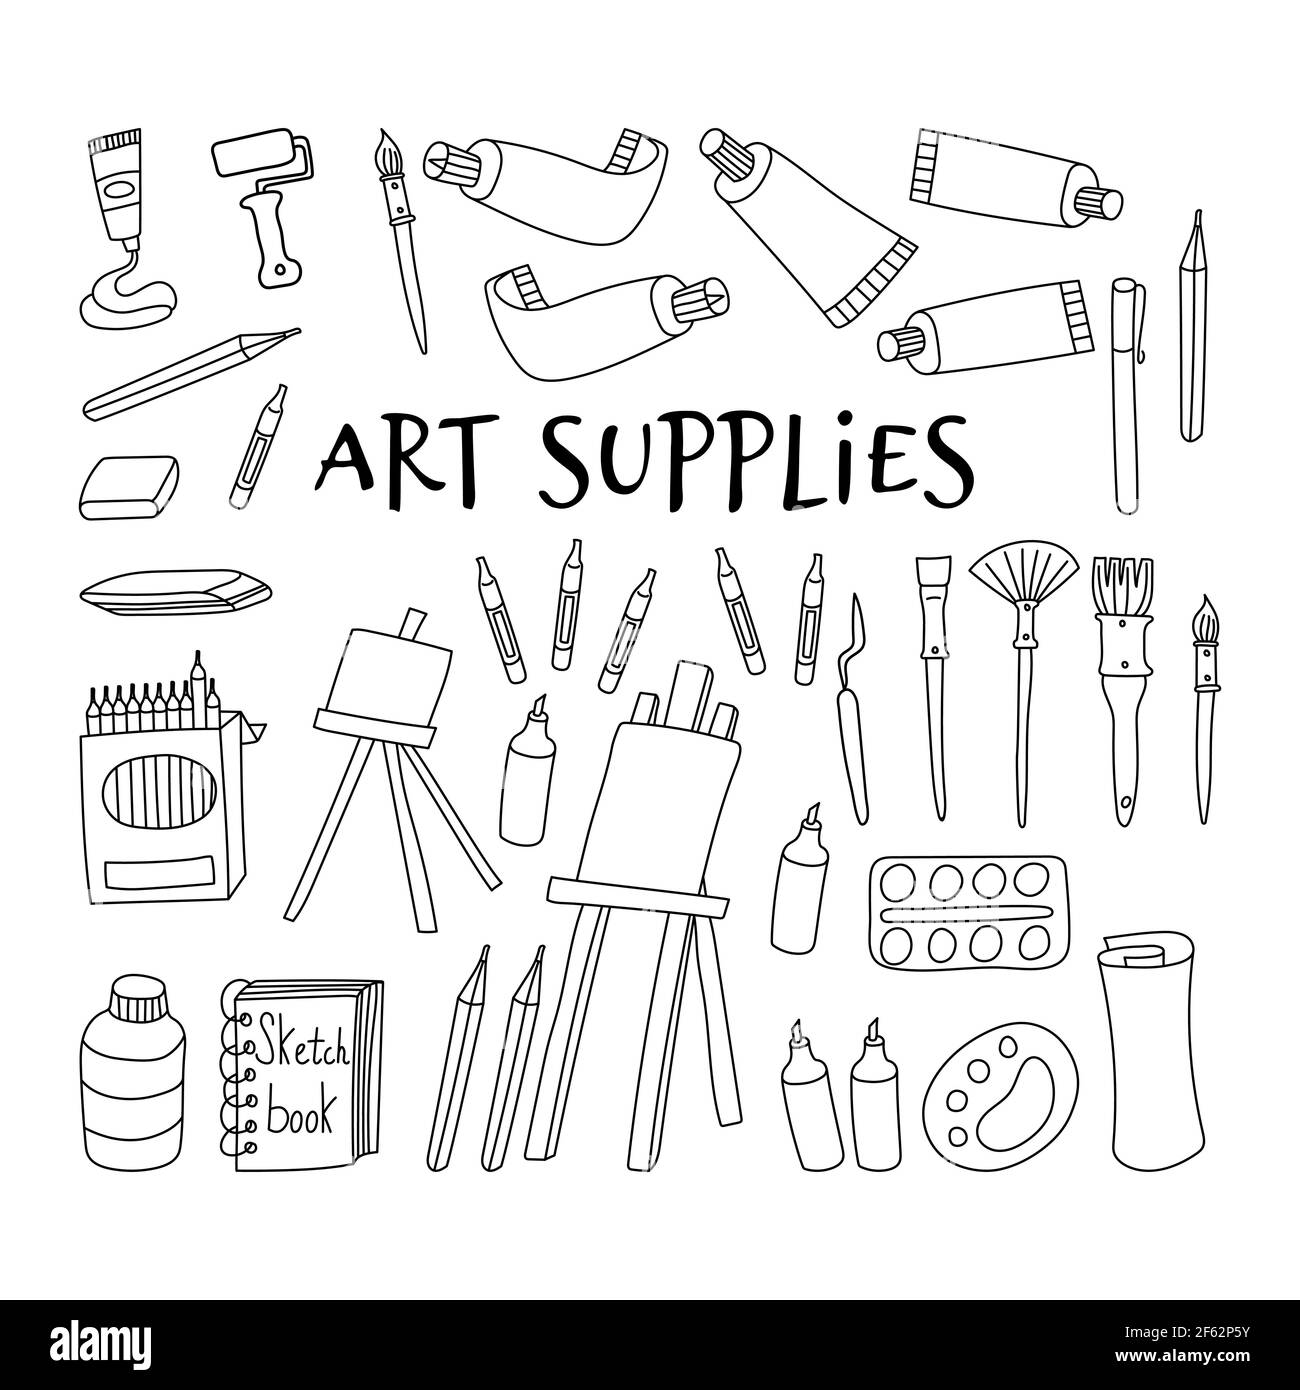 https://c8.alamy.com/comp/2F62P5Y/art-supplies-collection-hand-drawn-tools-for-painters-isolated-on-white-background-vector-illustration-2F62P5Y.jpg